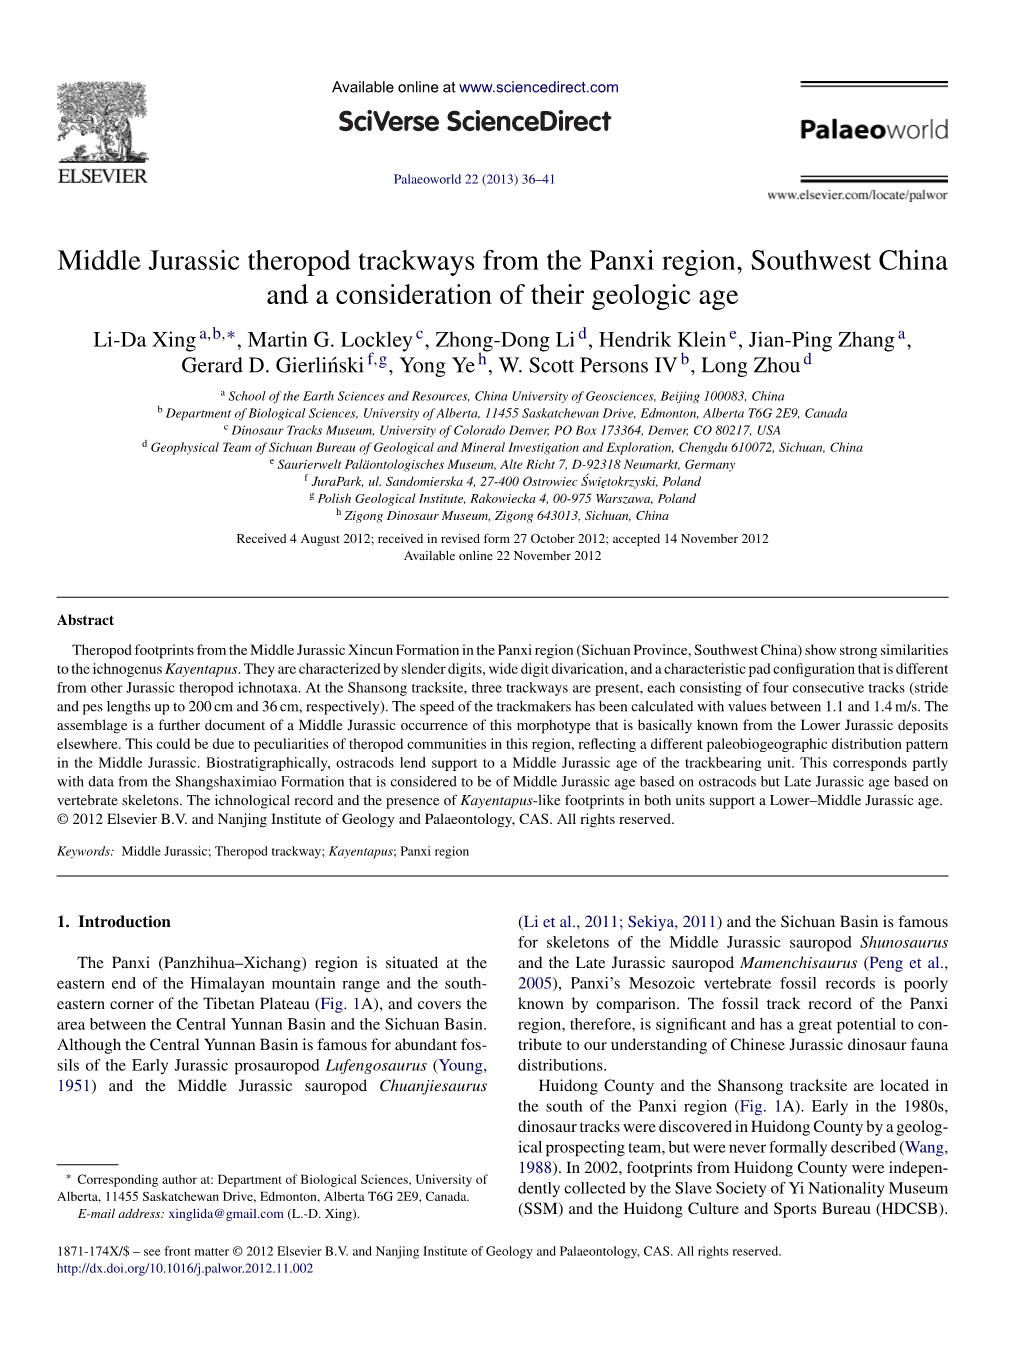 Middle Jurassic Theropod Trackways from the Panxi Region, Southwest China